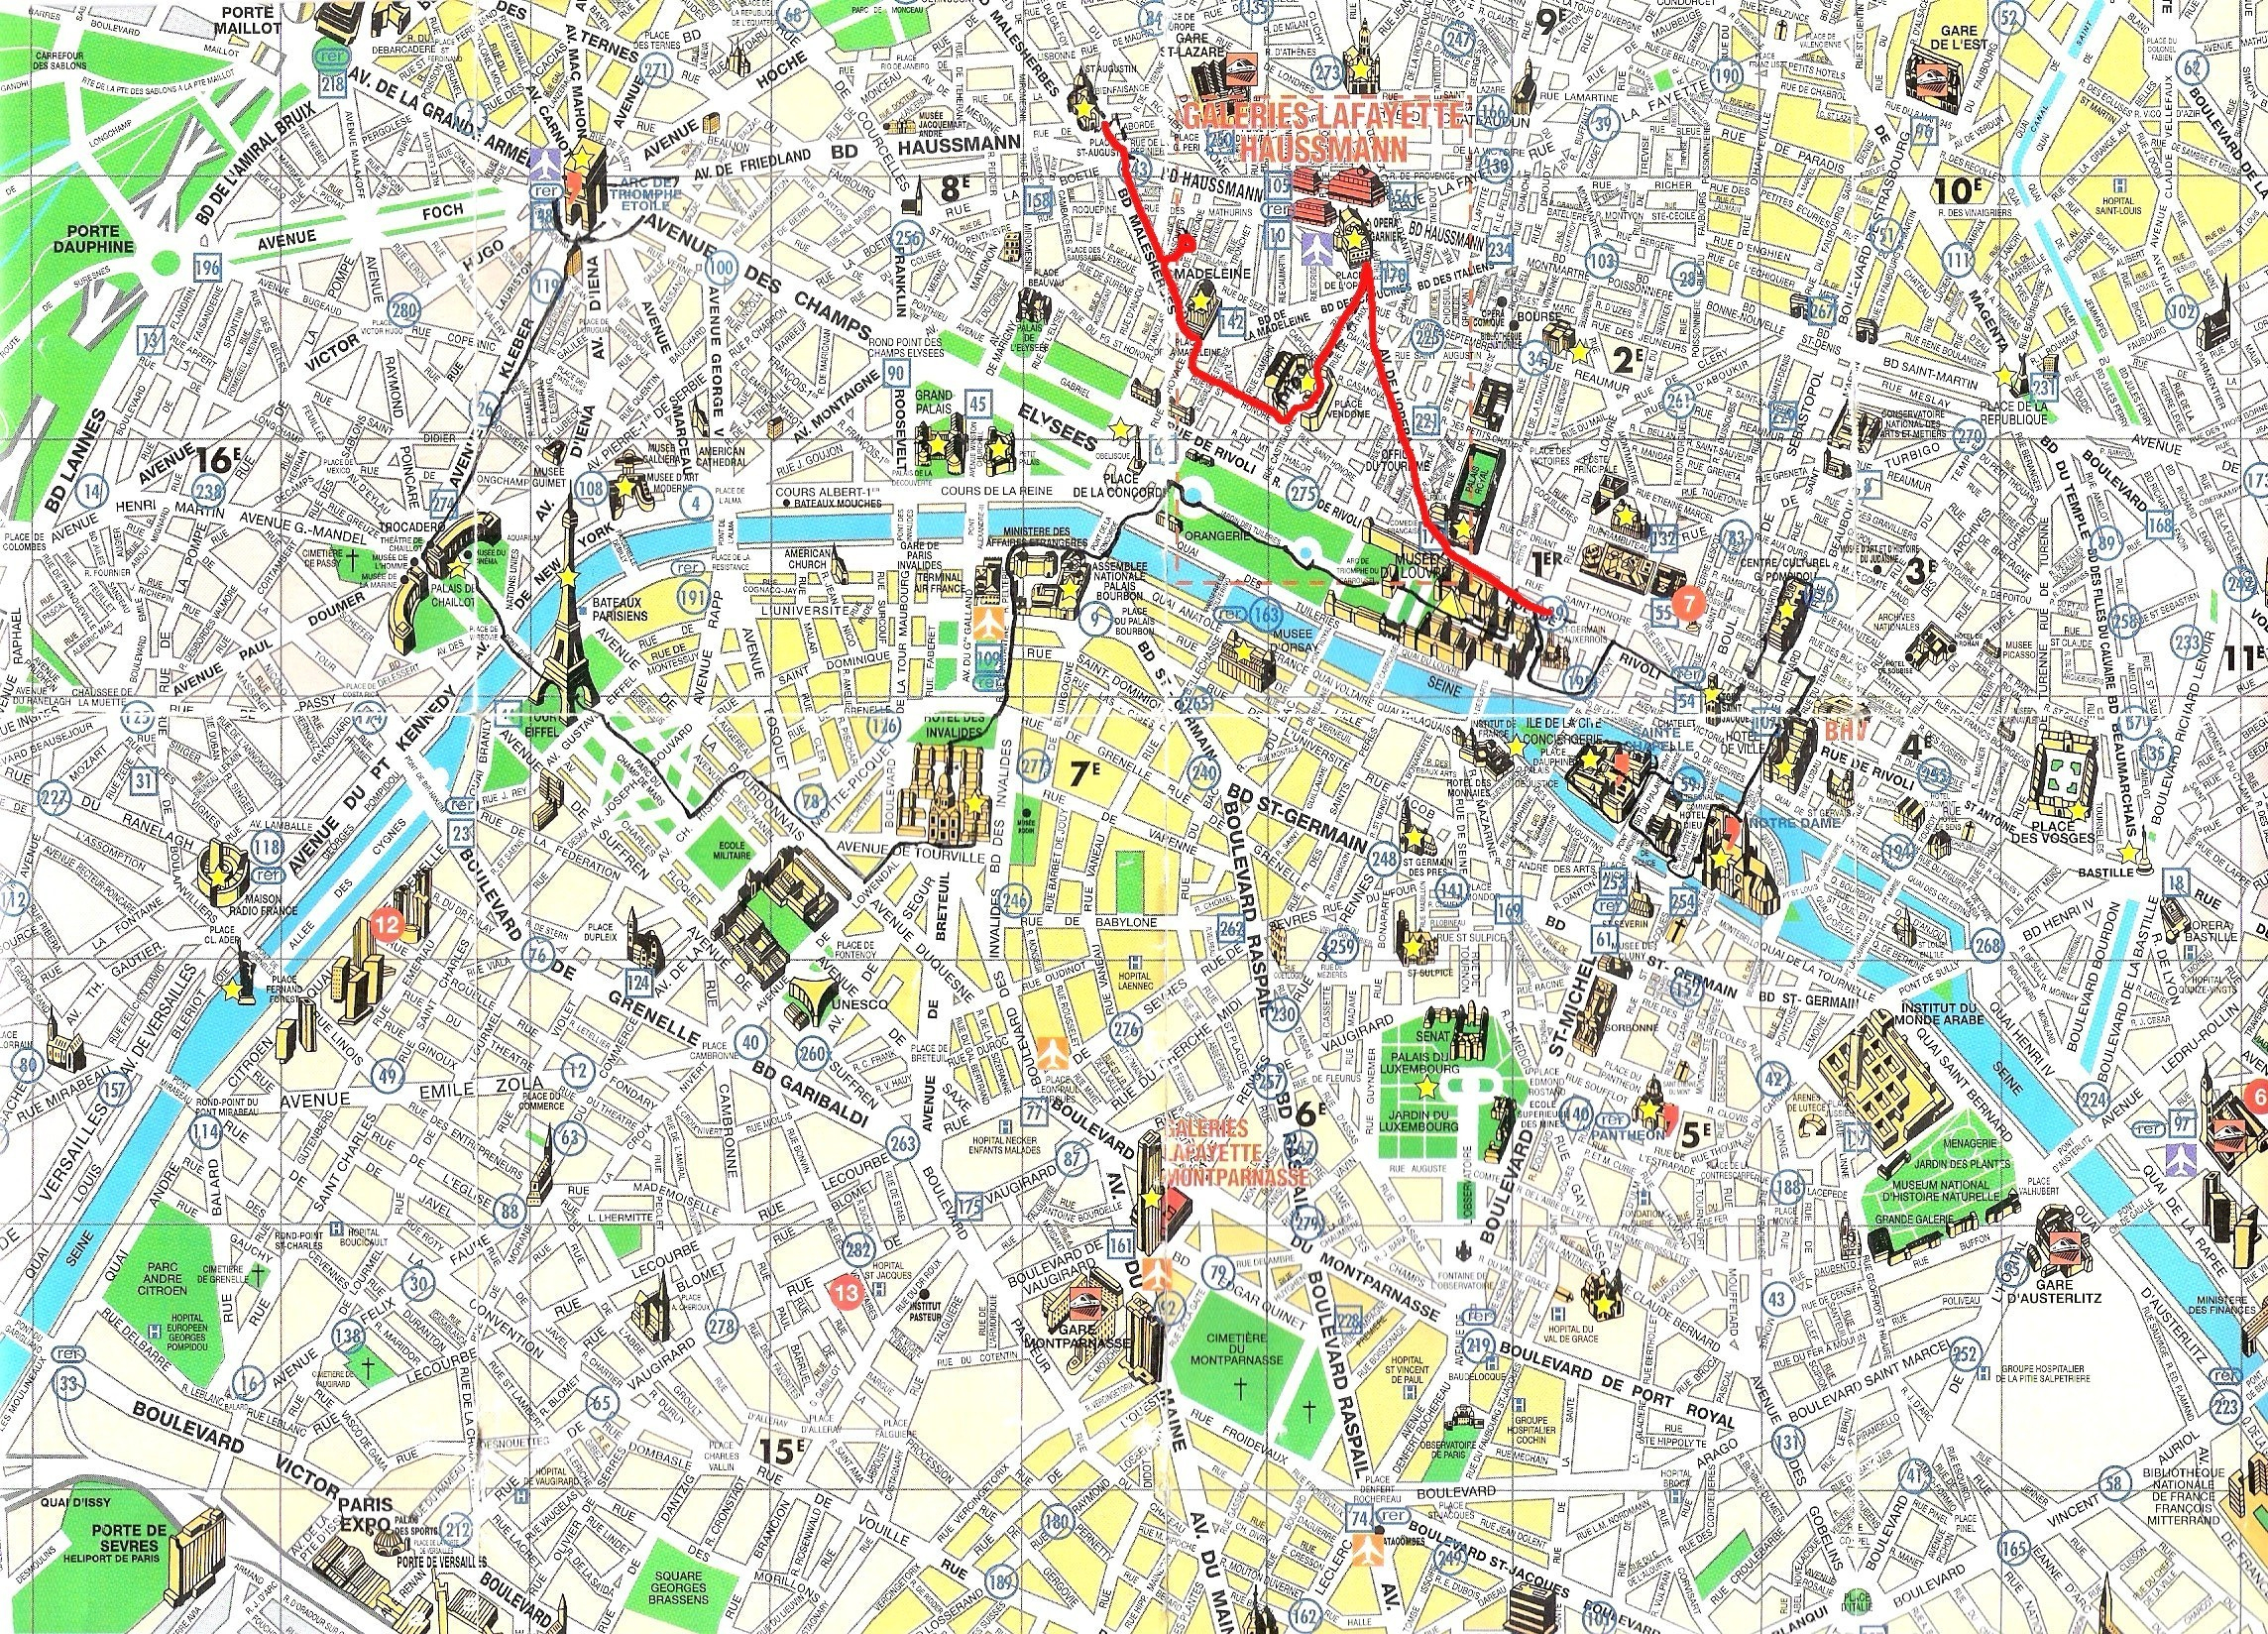 Street Maps Printable On Map Of Paris Tourist Lovely And For 1 0 - Printable Street Maps